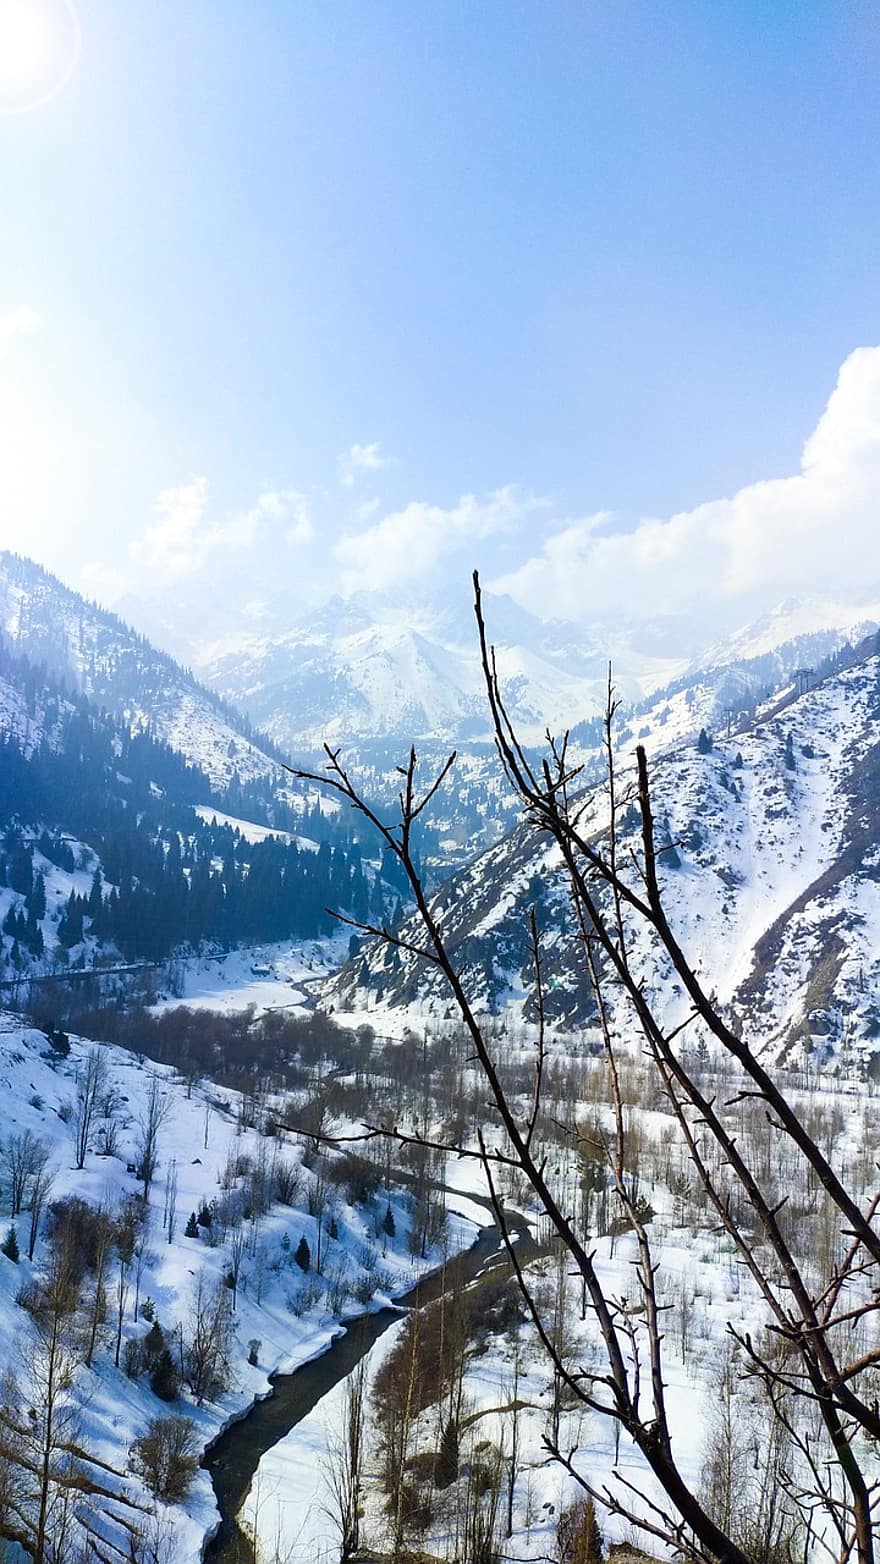 Mountains, Valley, Snow, Winter, Ice, Frost, Frozen, Cold, Snowy, Mountain Range, Landscape